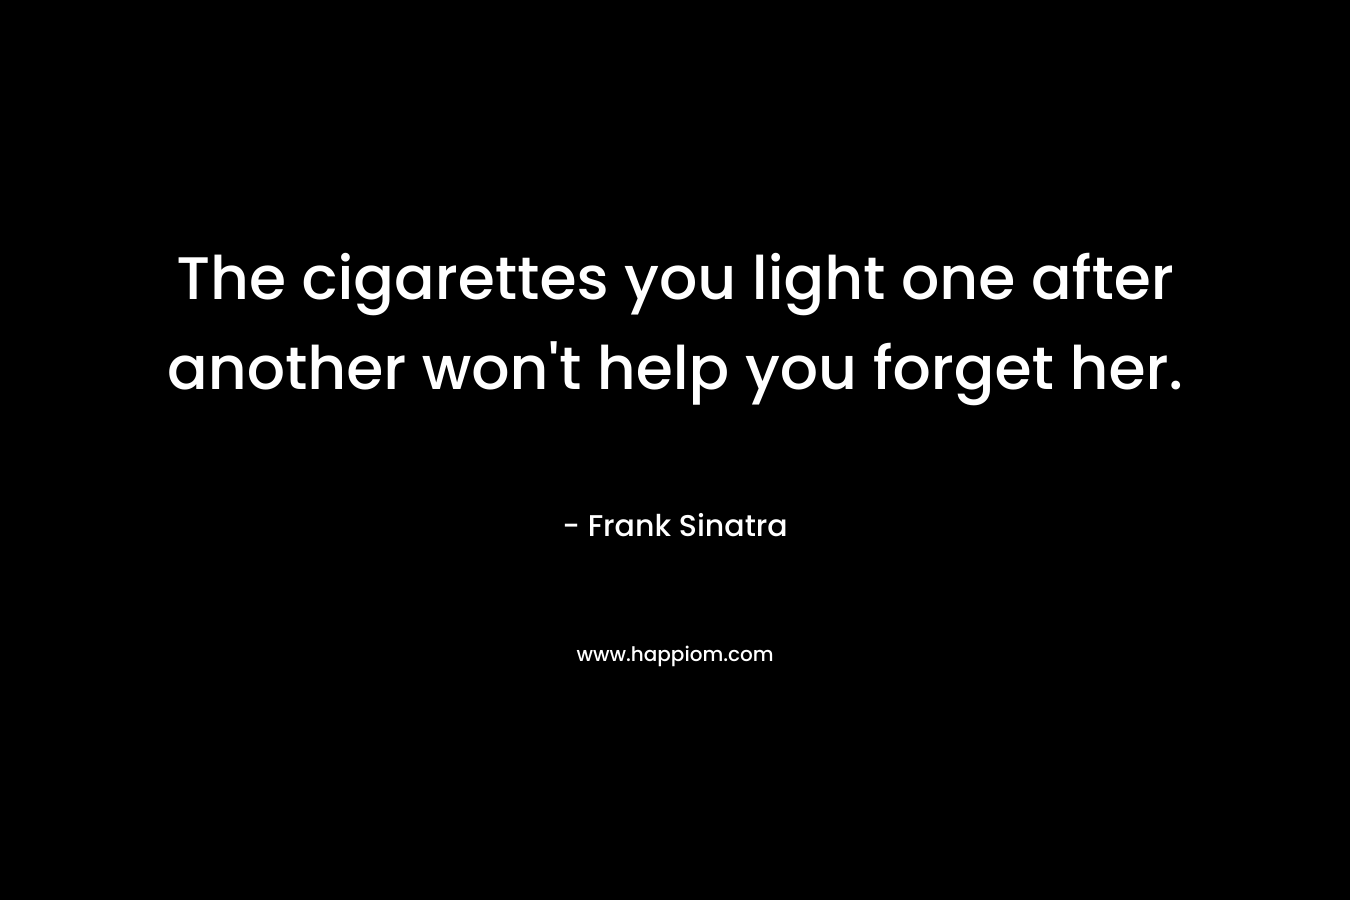 The cigarettes you light one after another won’t help you forget her. – Frank Sinatra